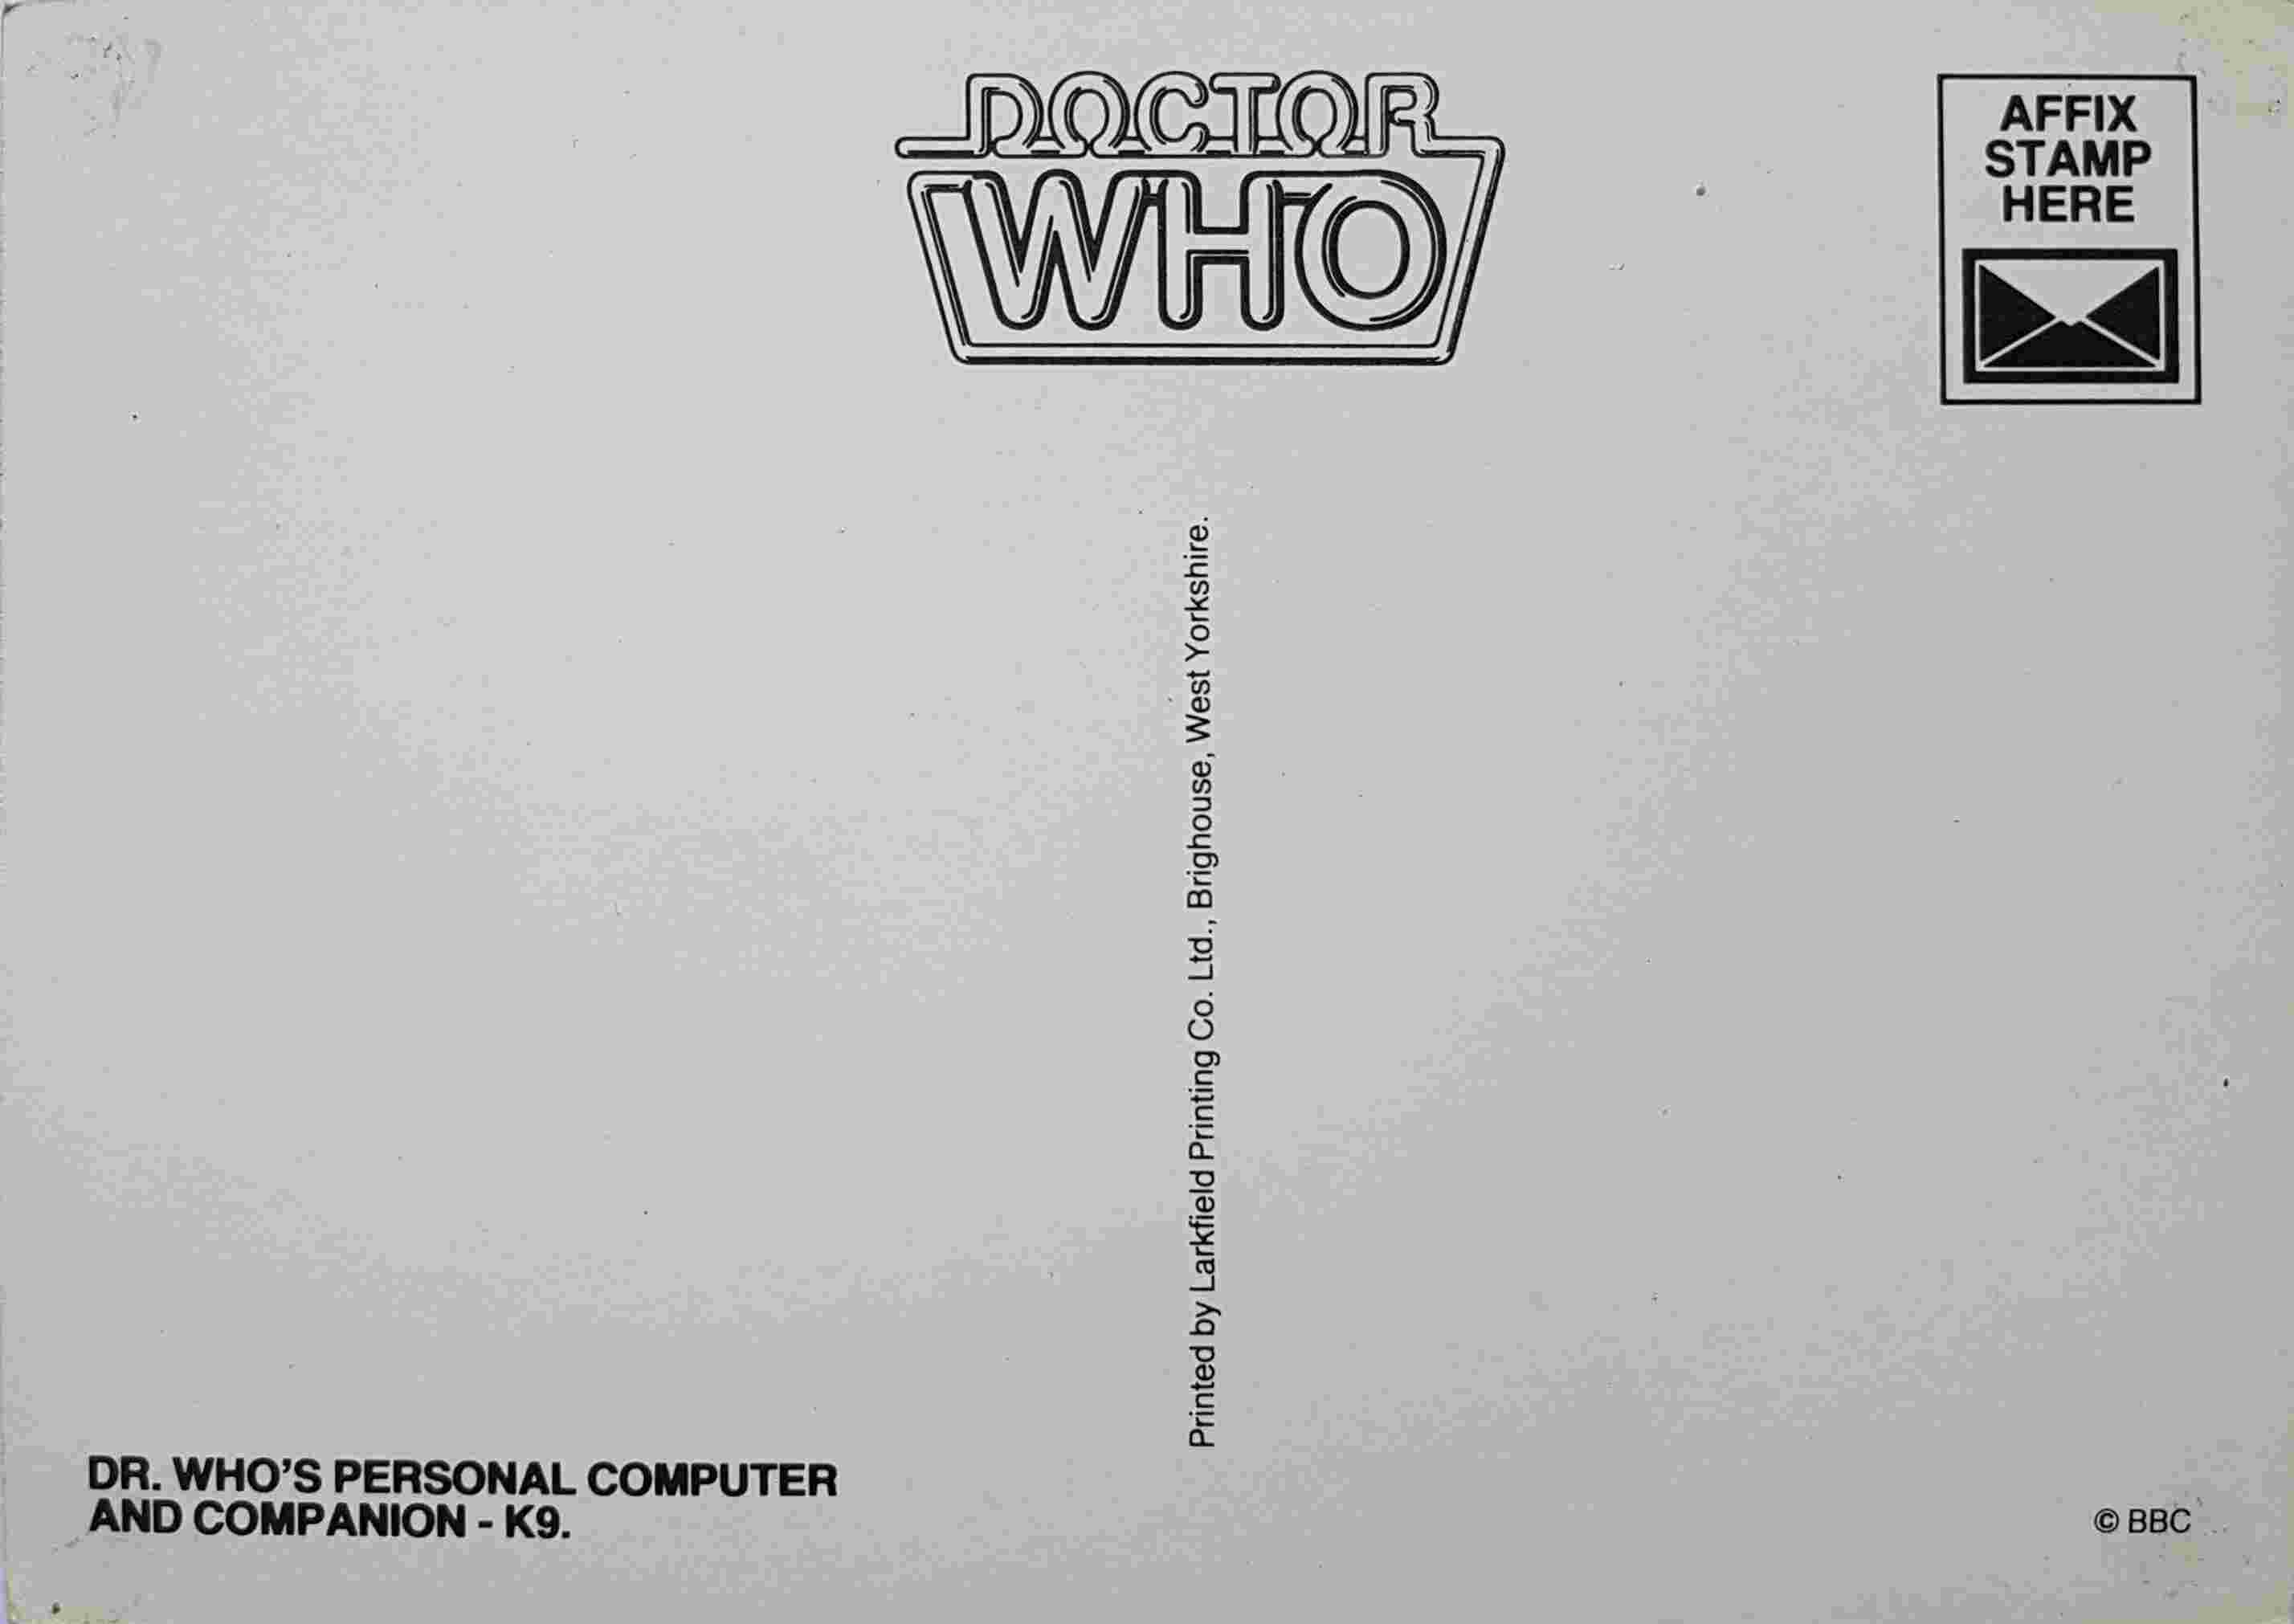 Picture of PC-DW-K9-2 Doctor Who - K-9 by artist Unknown from the BBC records and Tapes library